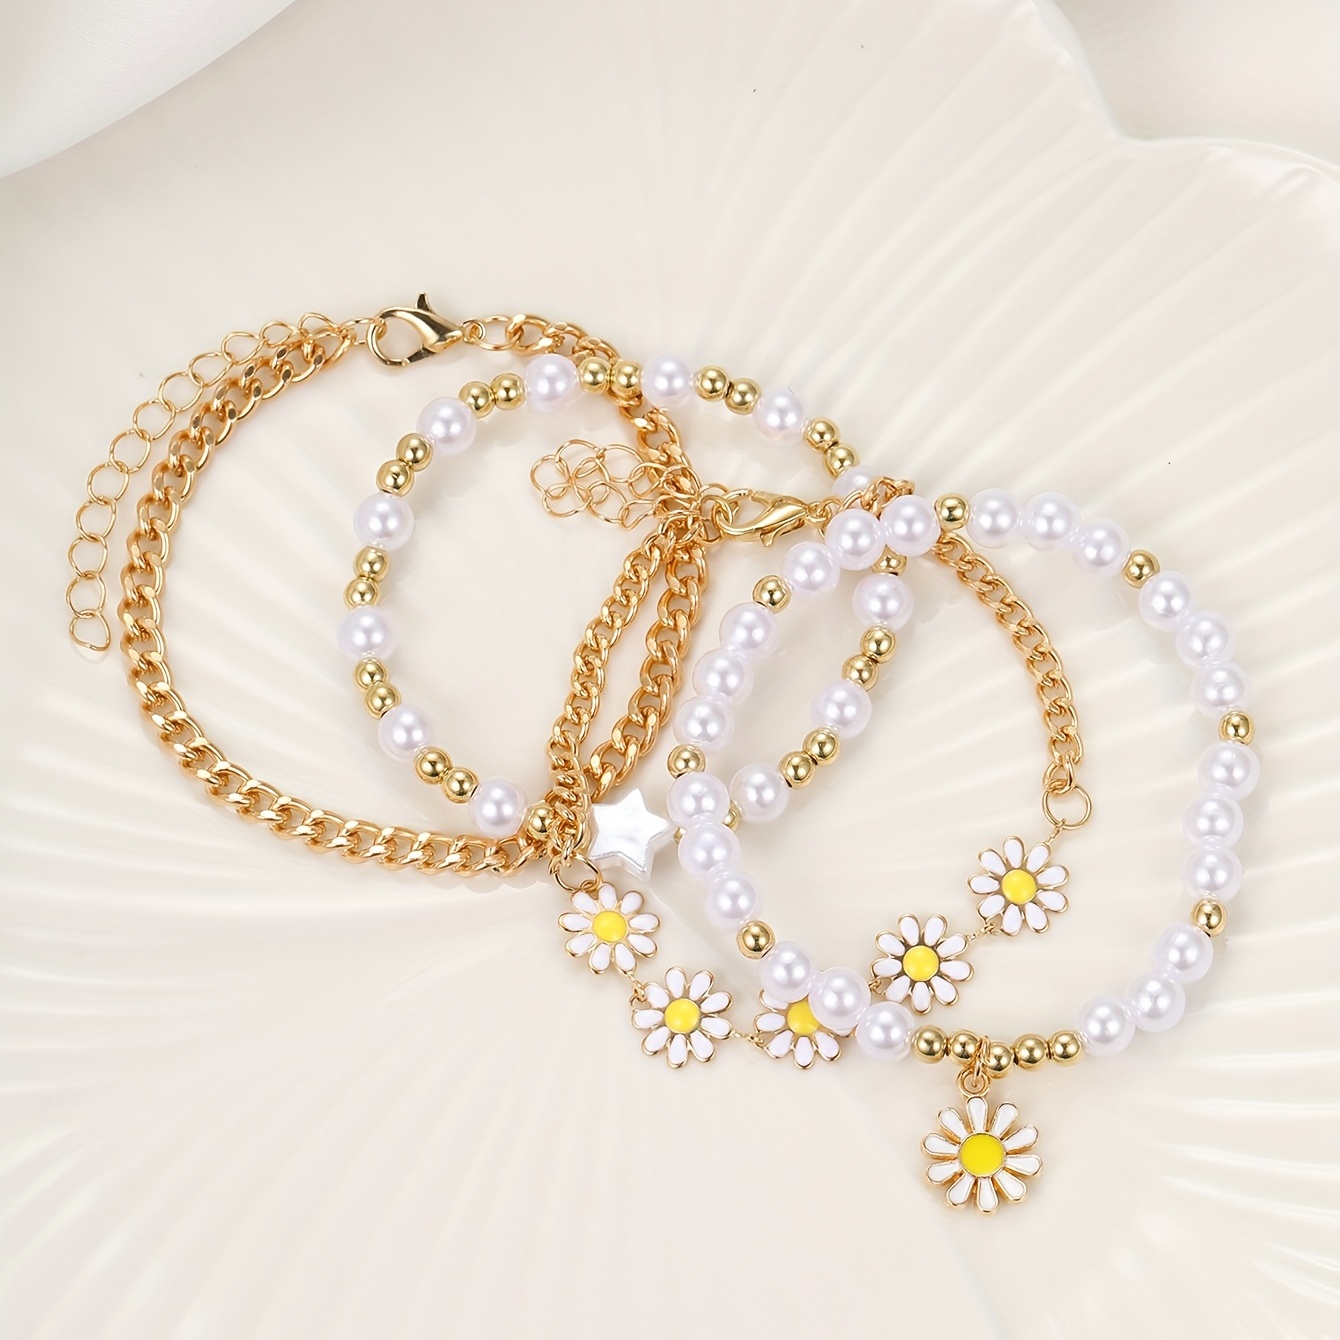 4pcs/Set Delicate Daisy Flower Charm & Faux Pearl Chain Bracelet Alloy Hand  Jewelry Gift For Girls